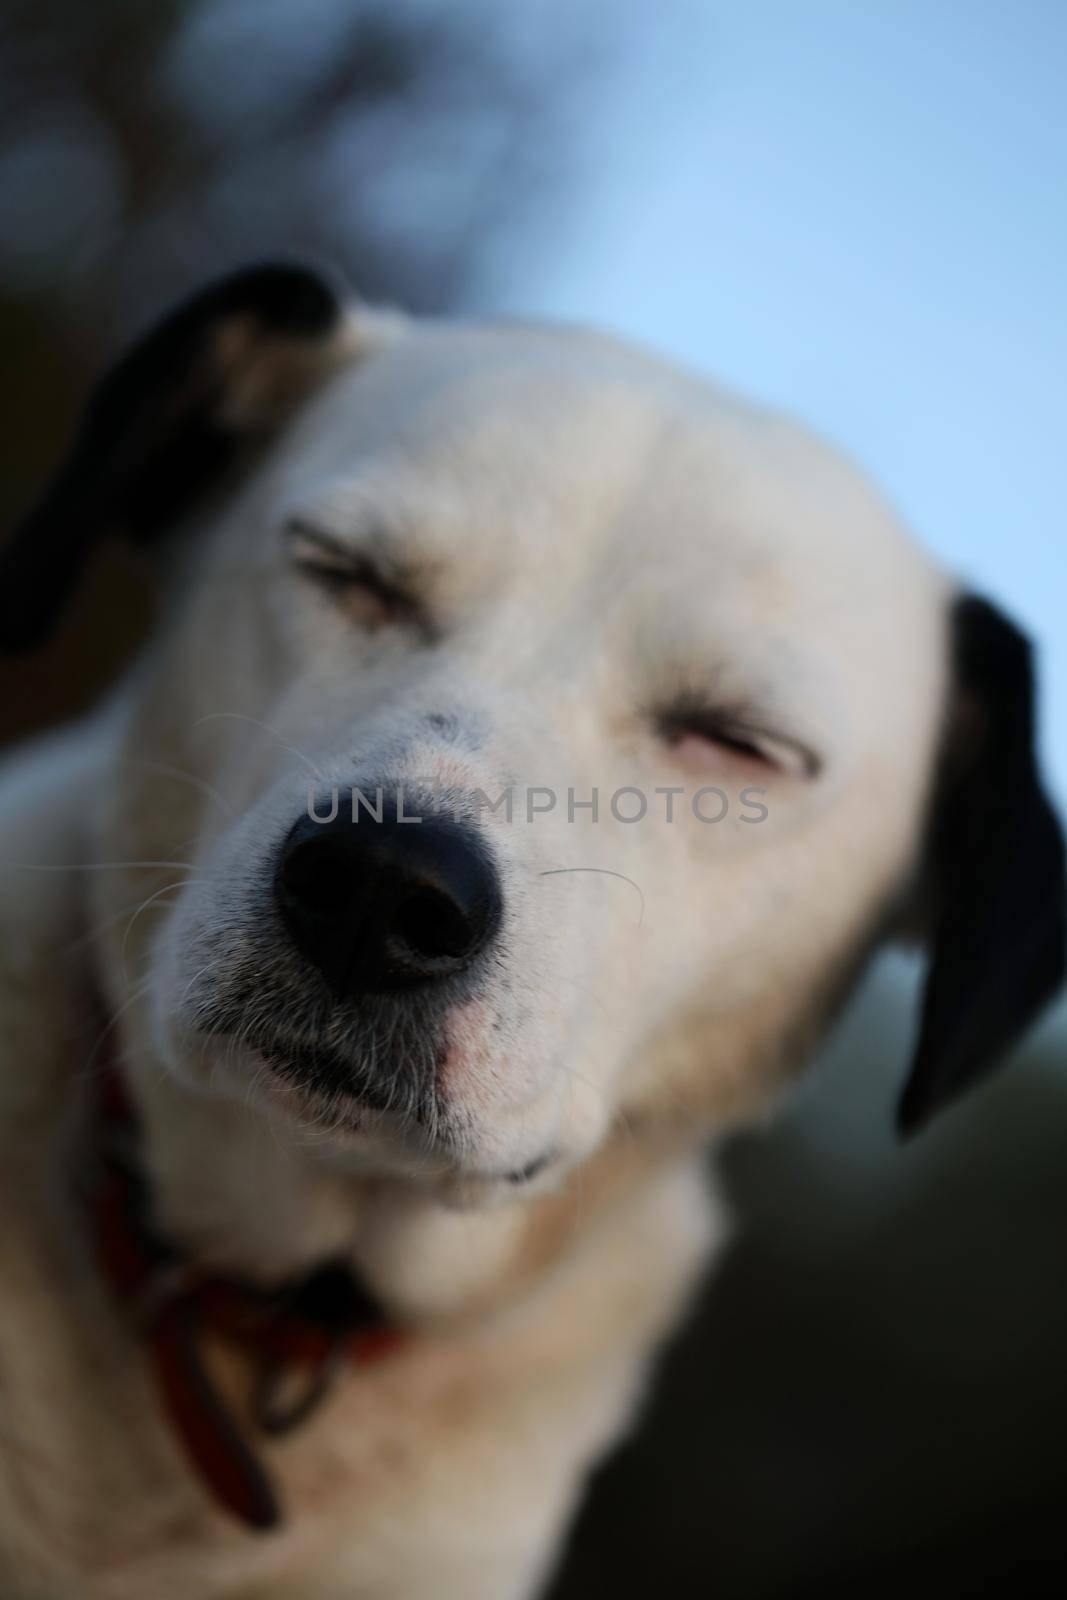 Cute white and black dog profile close up animal background high quality big size instant prints